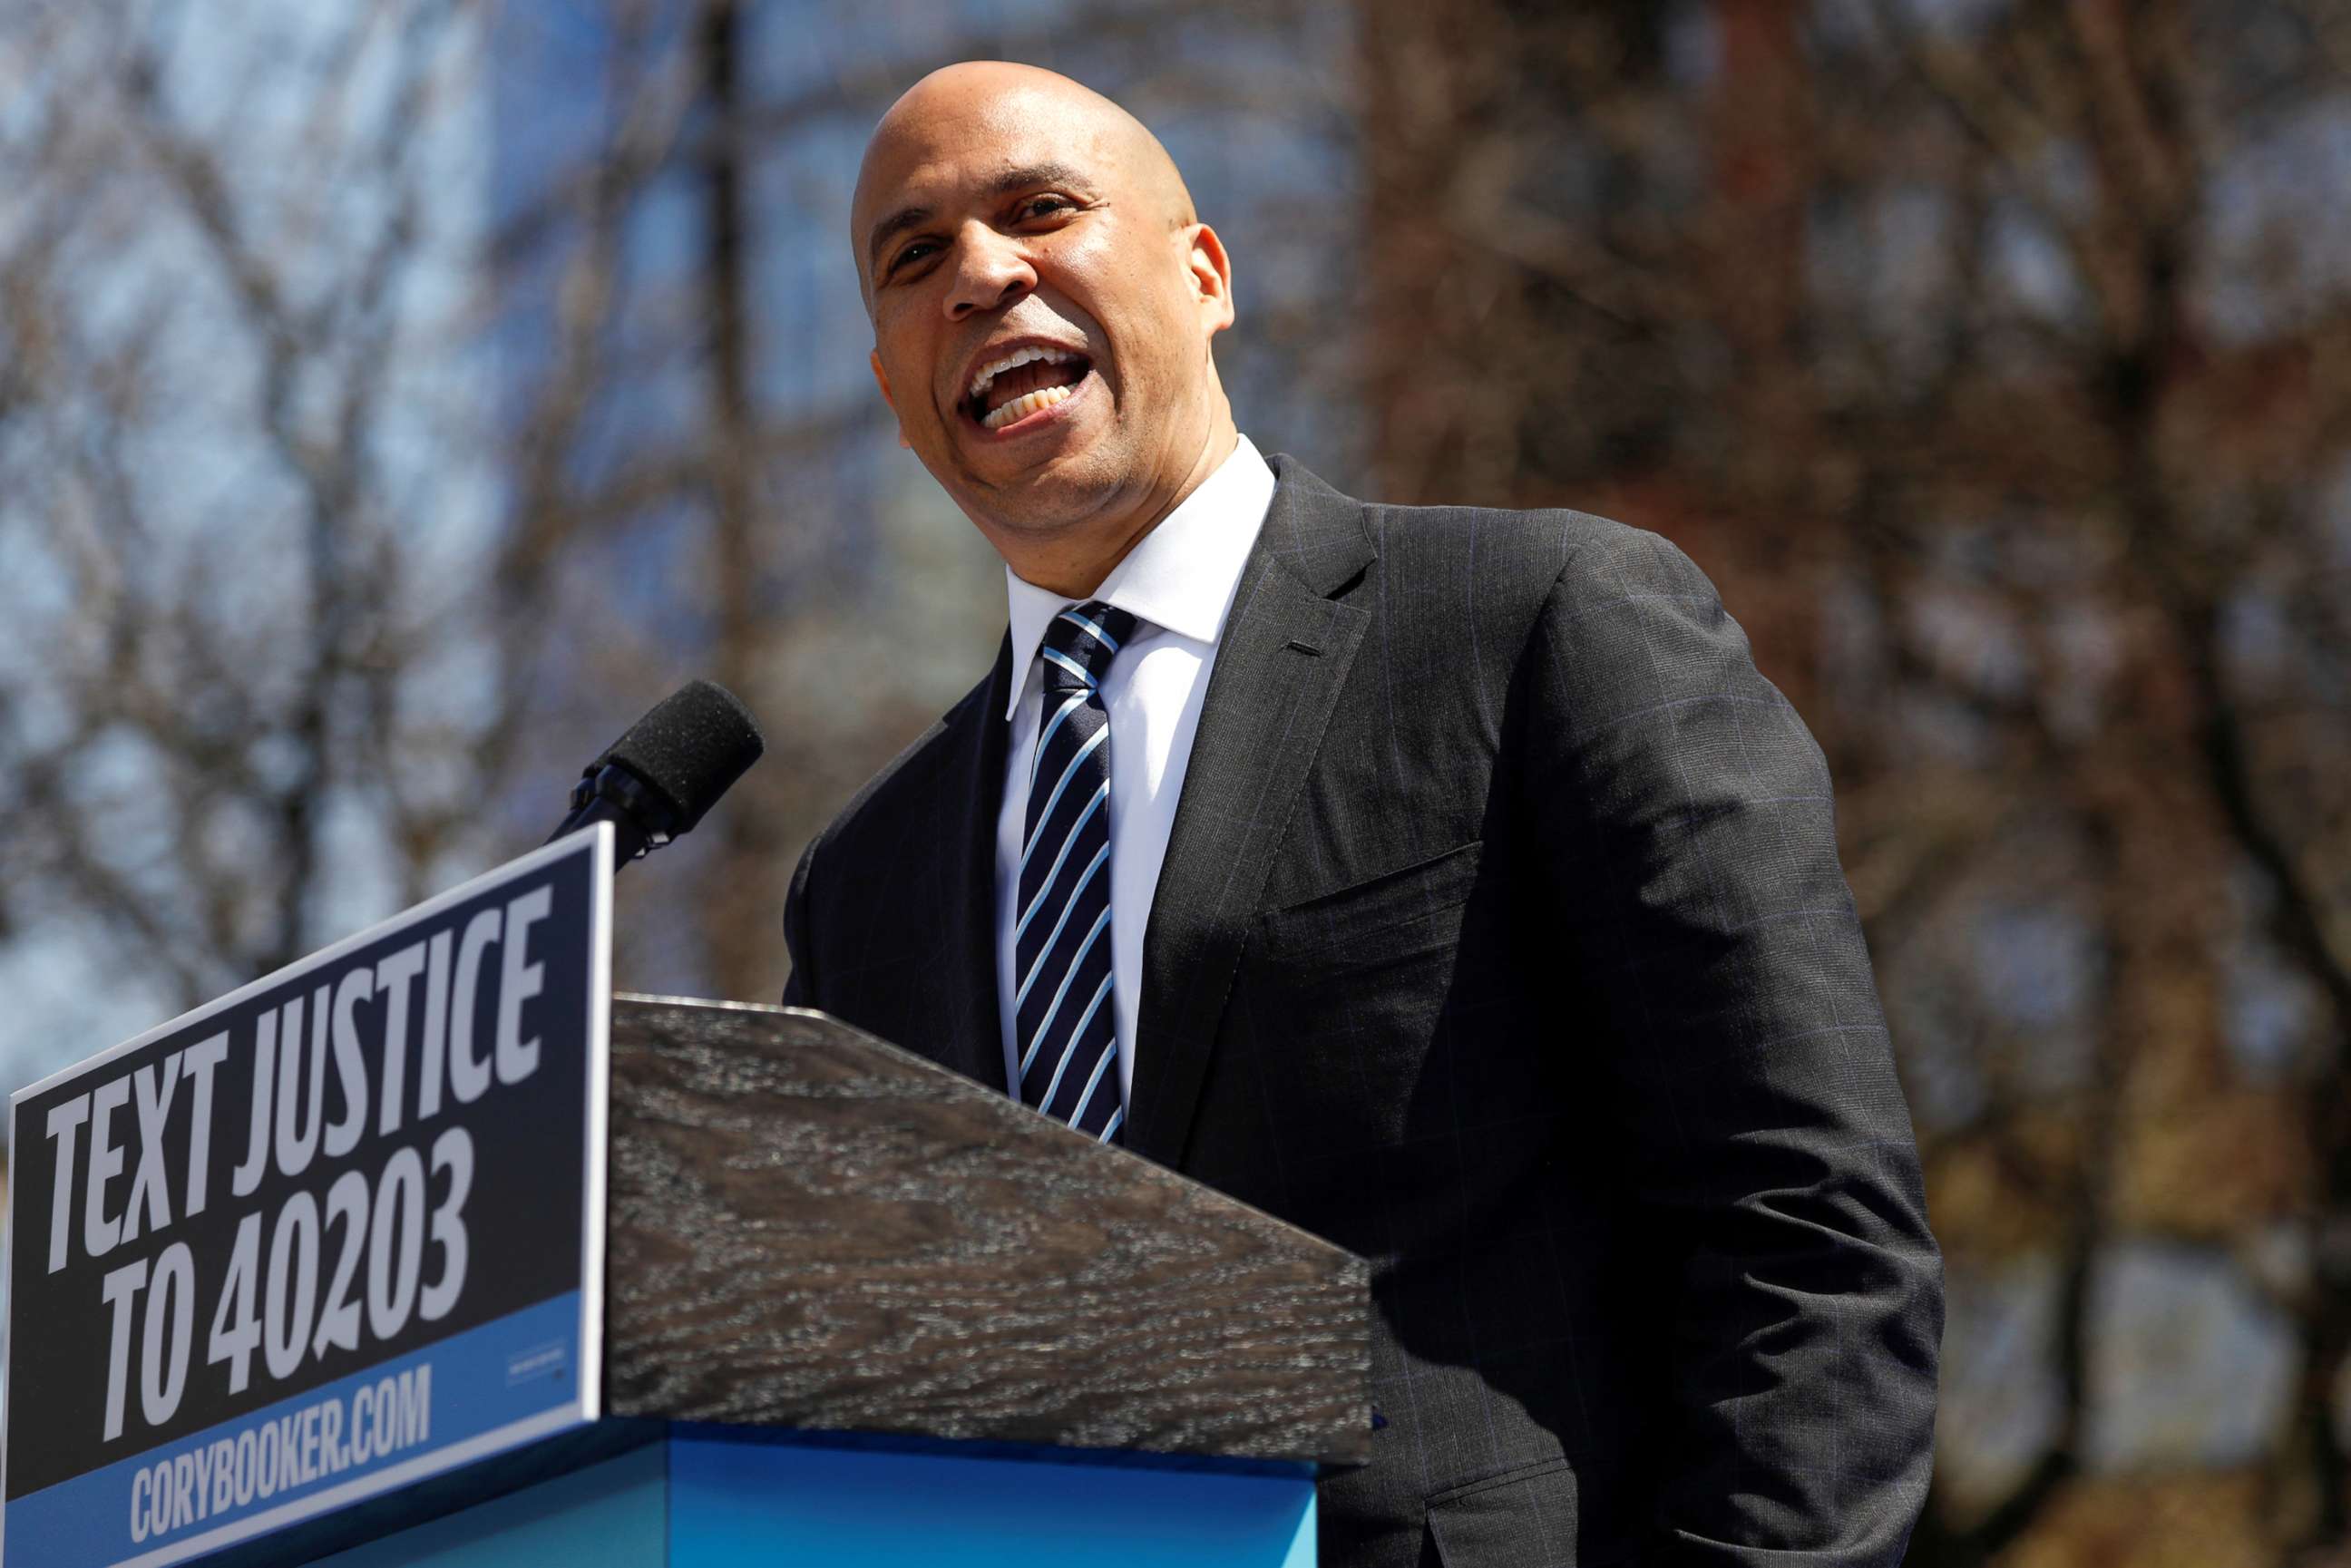 PHOTO: U.S. Senator Cory Booker speaks at his Hometown Kickoff event, part of the senator's "Justice for All" tour, the first such national tour of his presidential campaign in Newark, N.J., April 13, 2019.